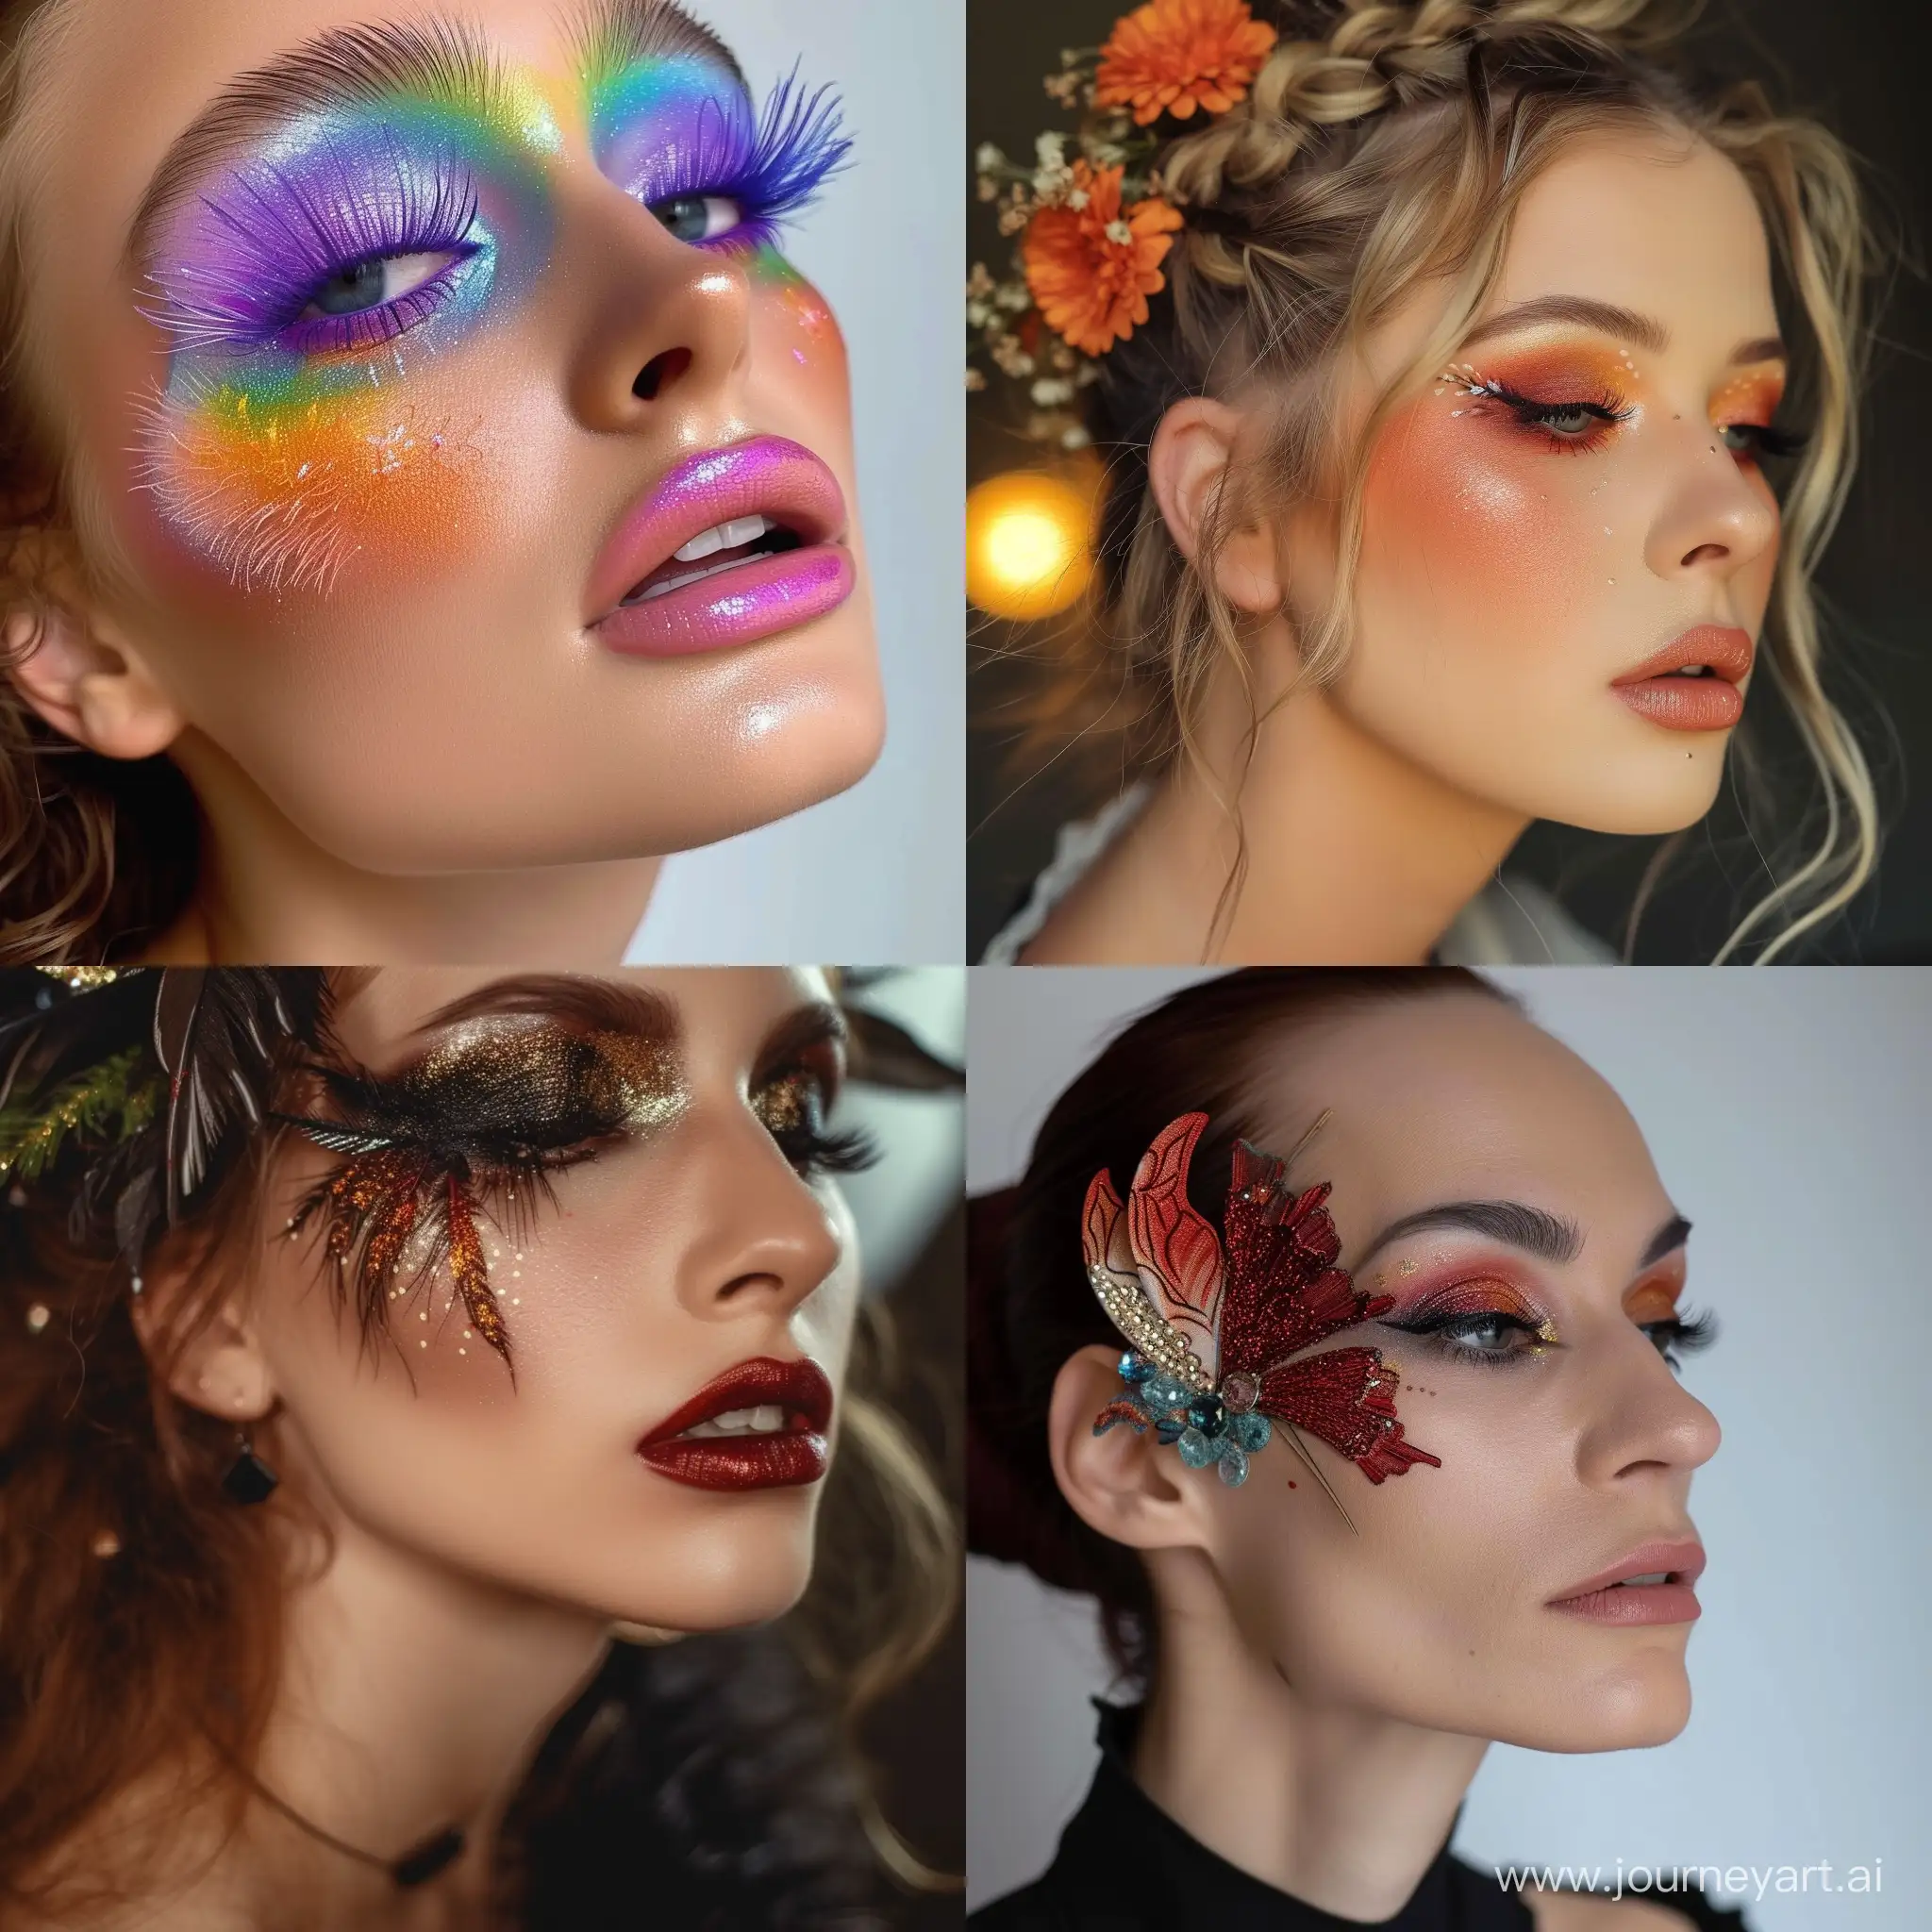 Vibrant-Makeup-Creation-with-6-Color-Variations-in-a-11-Aspect-Ratio-Beauty-and-Art-Fusion